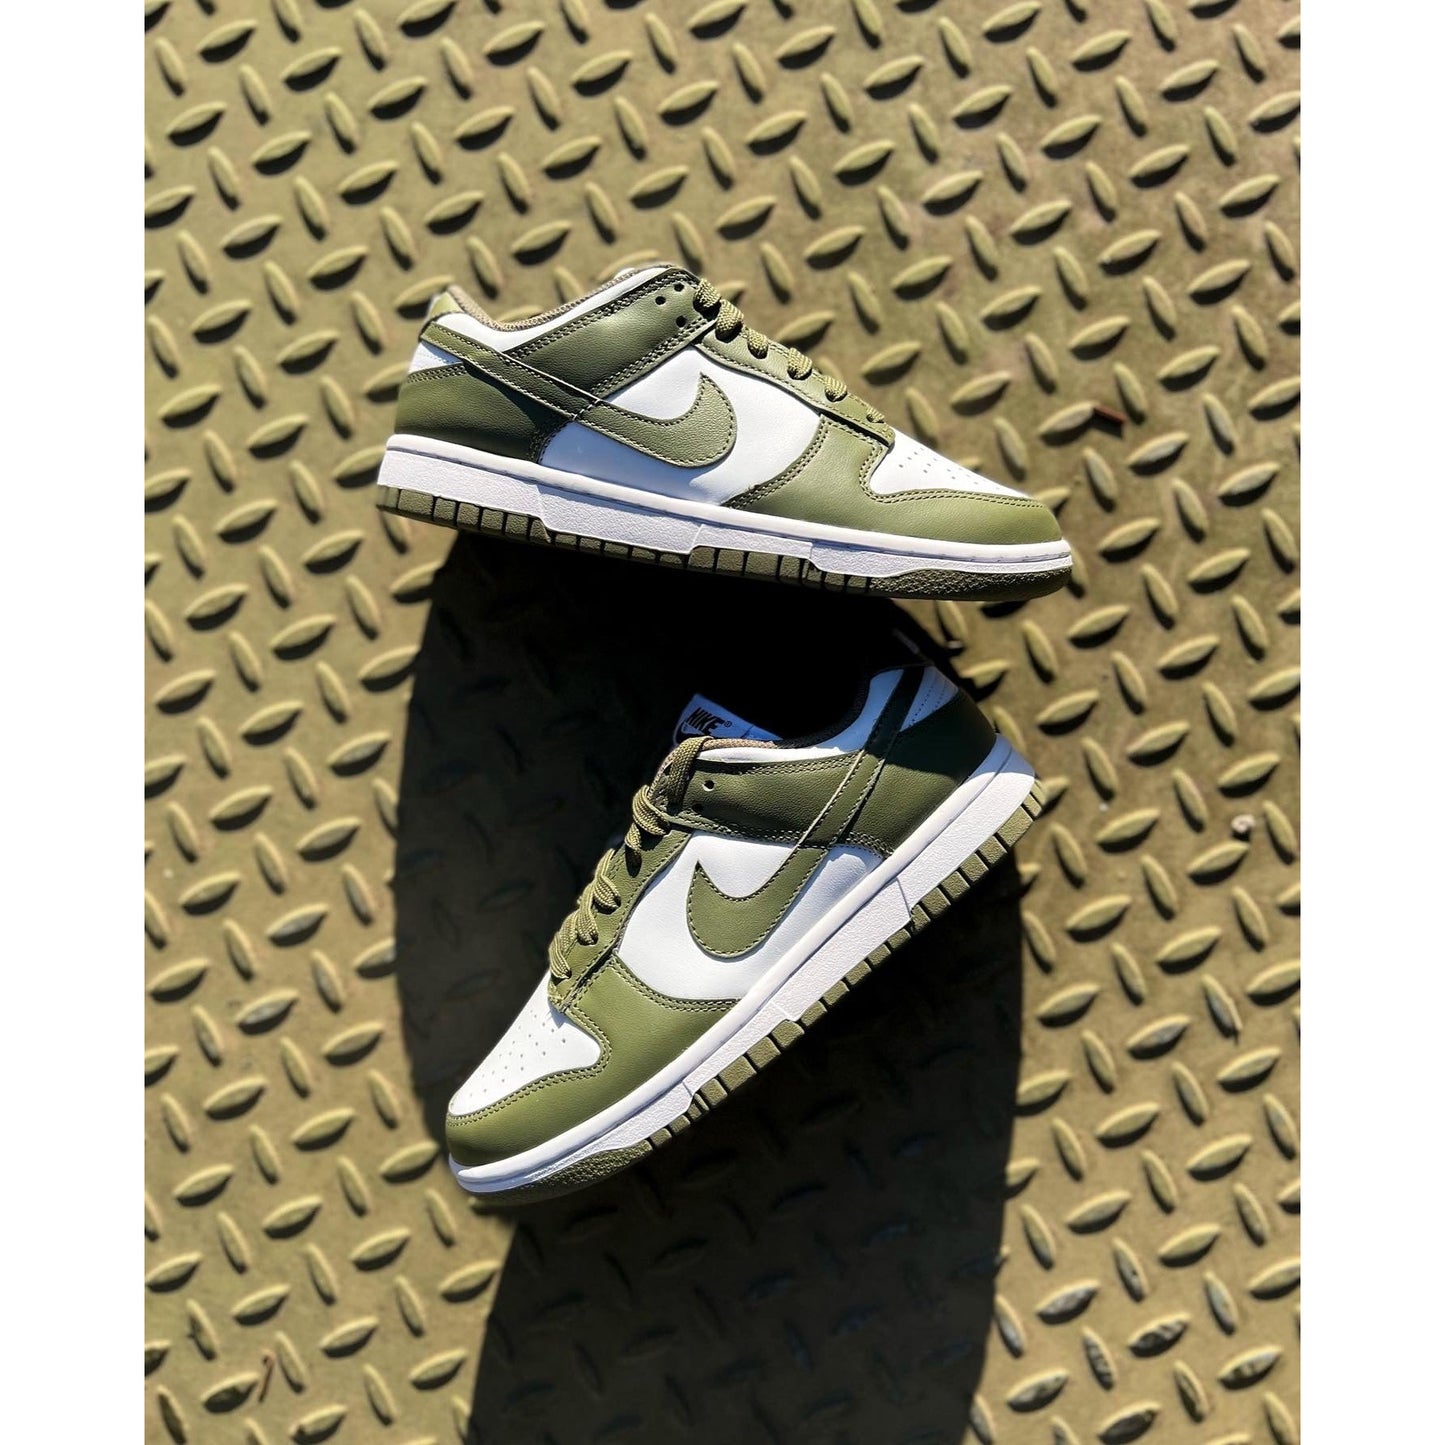 Nike Dunk Low Medium Olive (W) from Nike